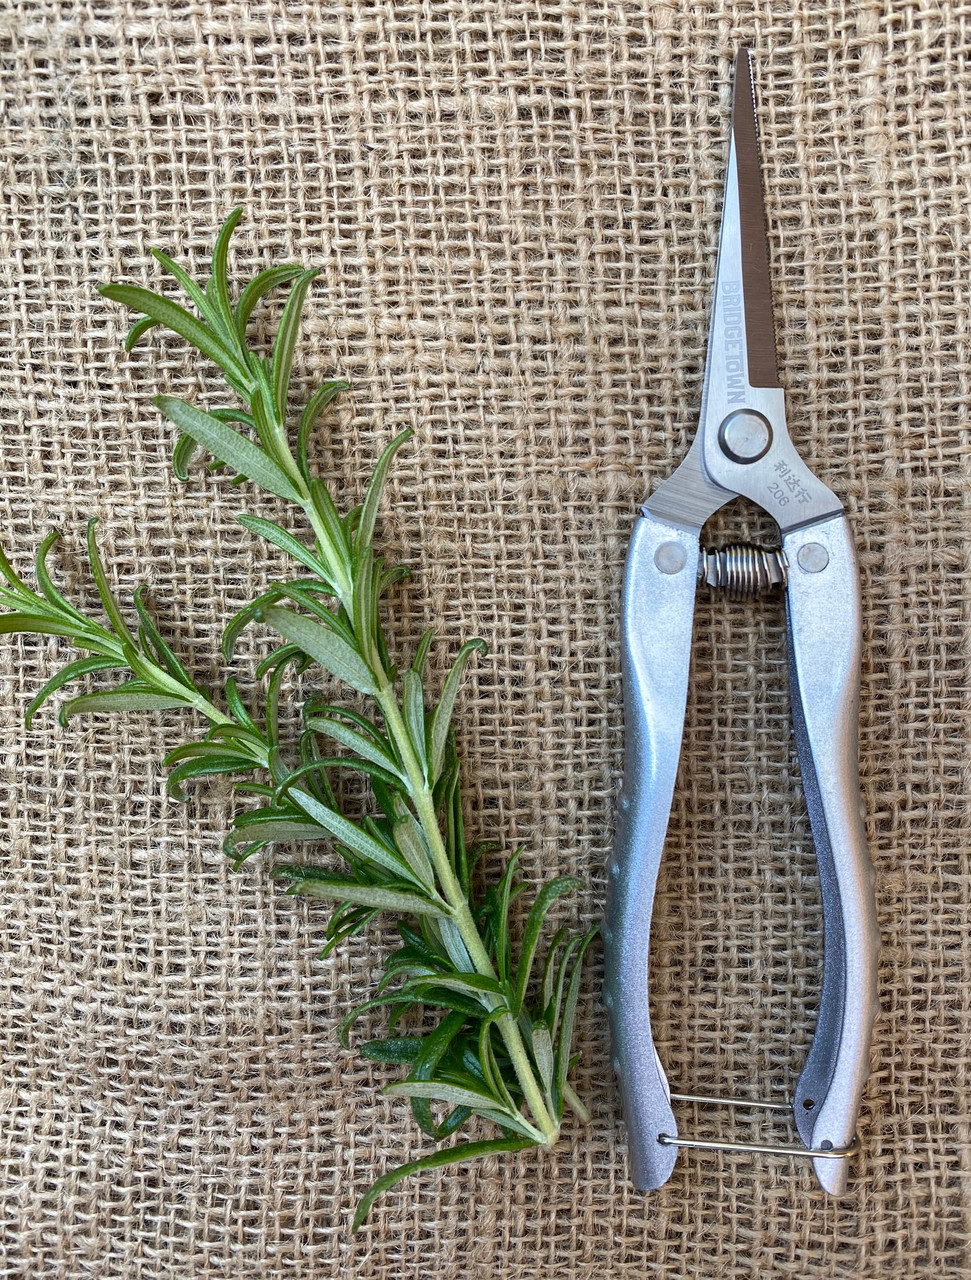 Long Snips - Garden Snips with Long Blades